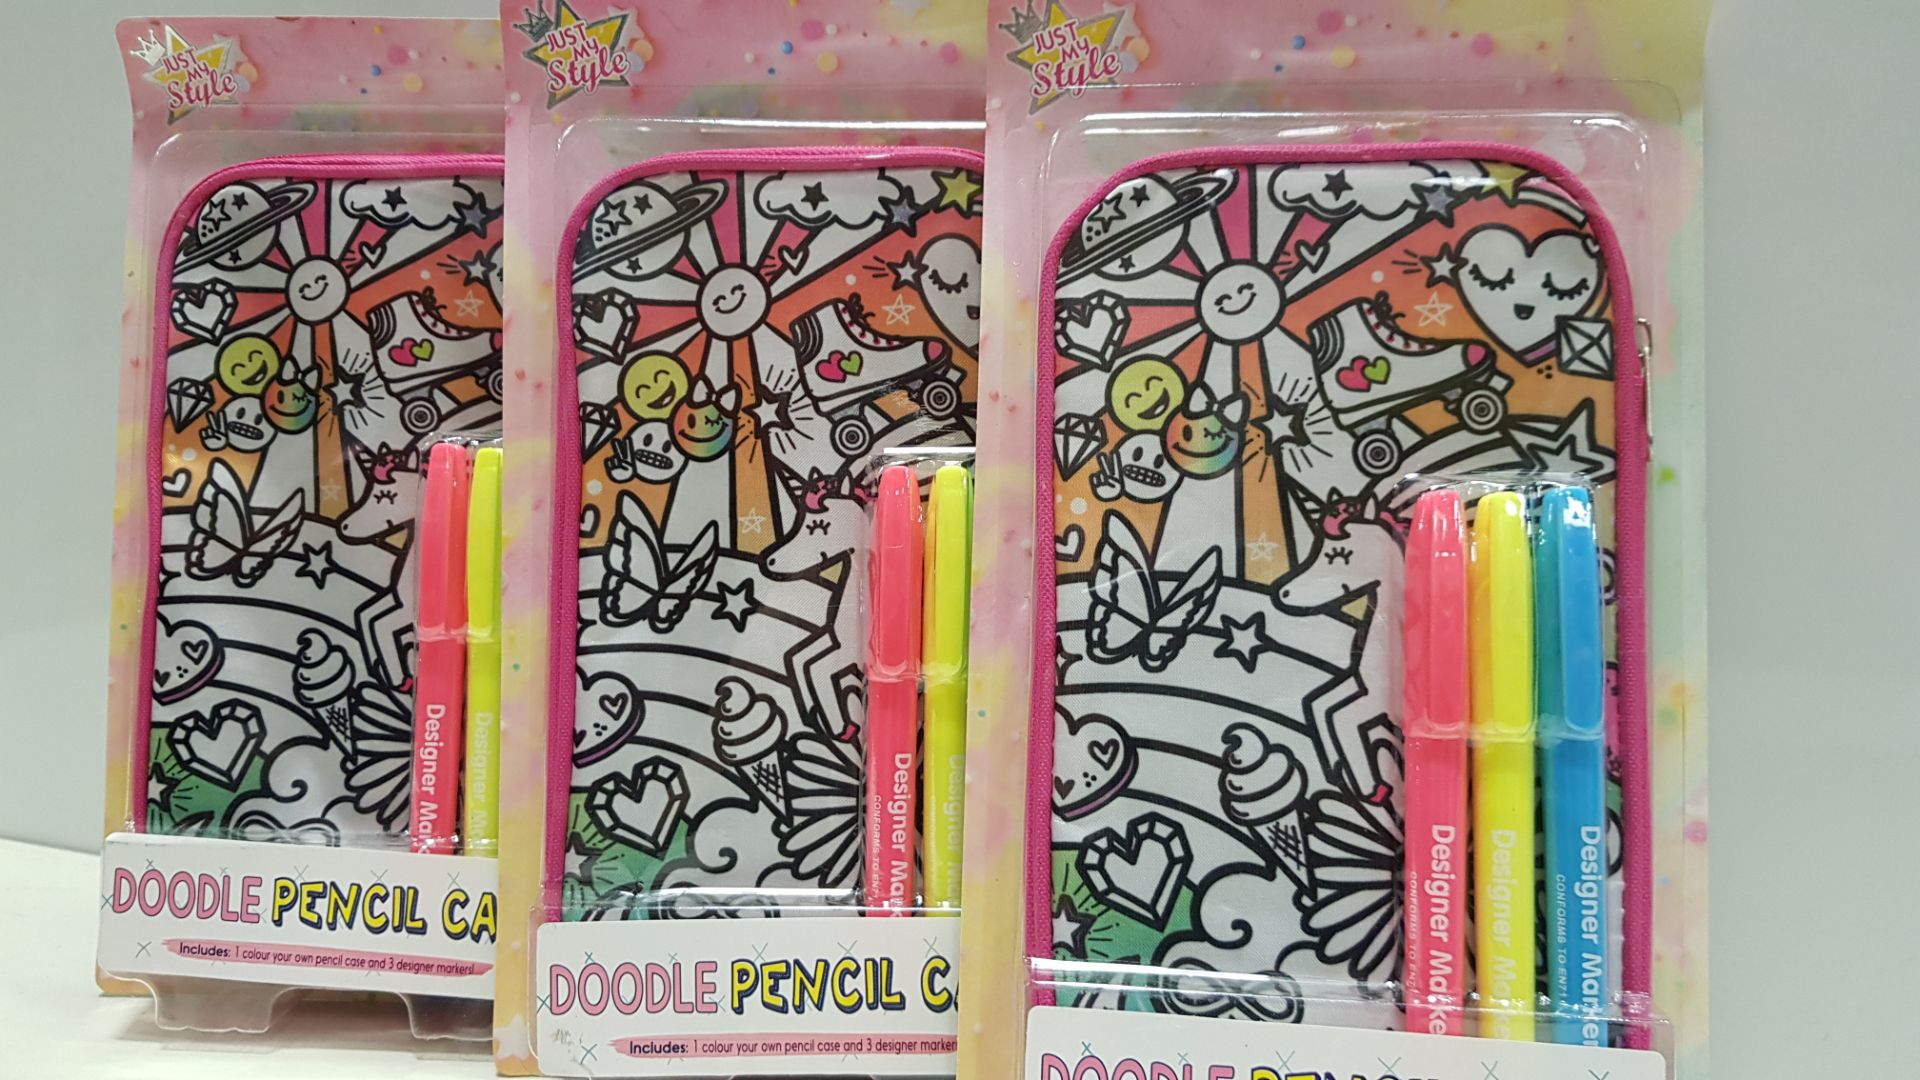 70 X BRAND NEW JUST MY STYLE DOODLE PENCIL CASE WITH DIFFERENT COLOURED PENS IN 5 BOXES